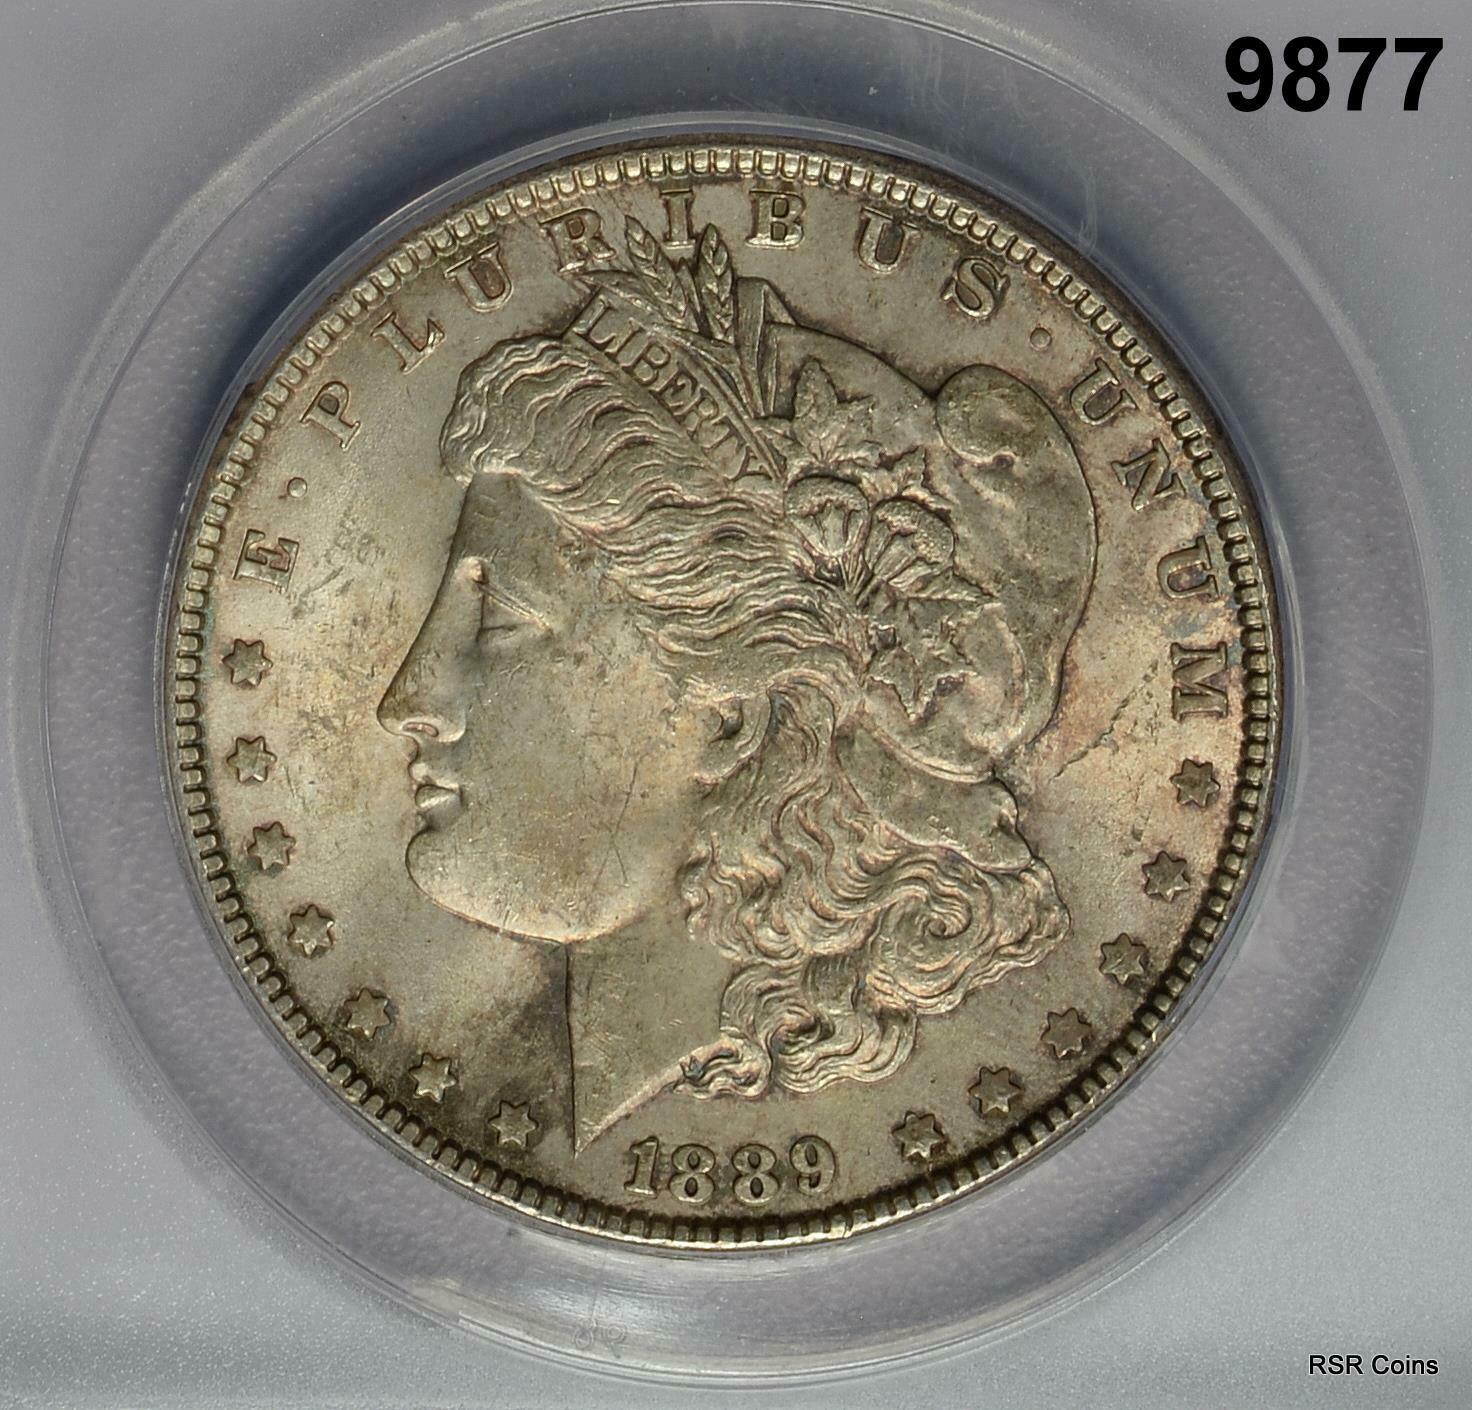 1889 MORGAN SILVER DOLLAR AMBER BLUE TONED! ANACS CERTIFIED MS63 #9877